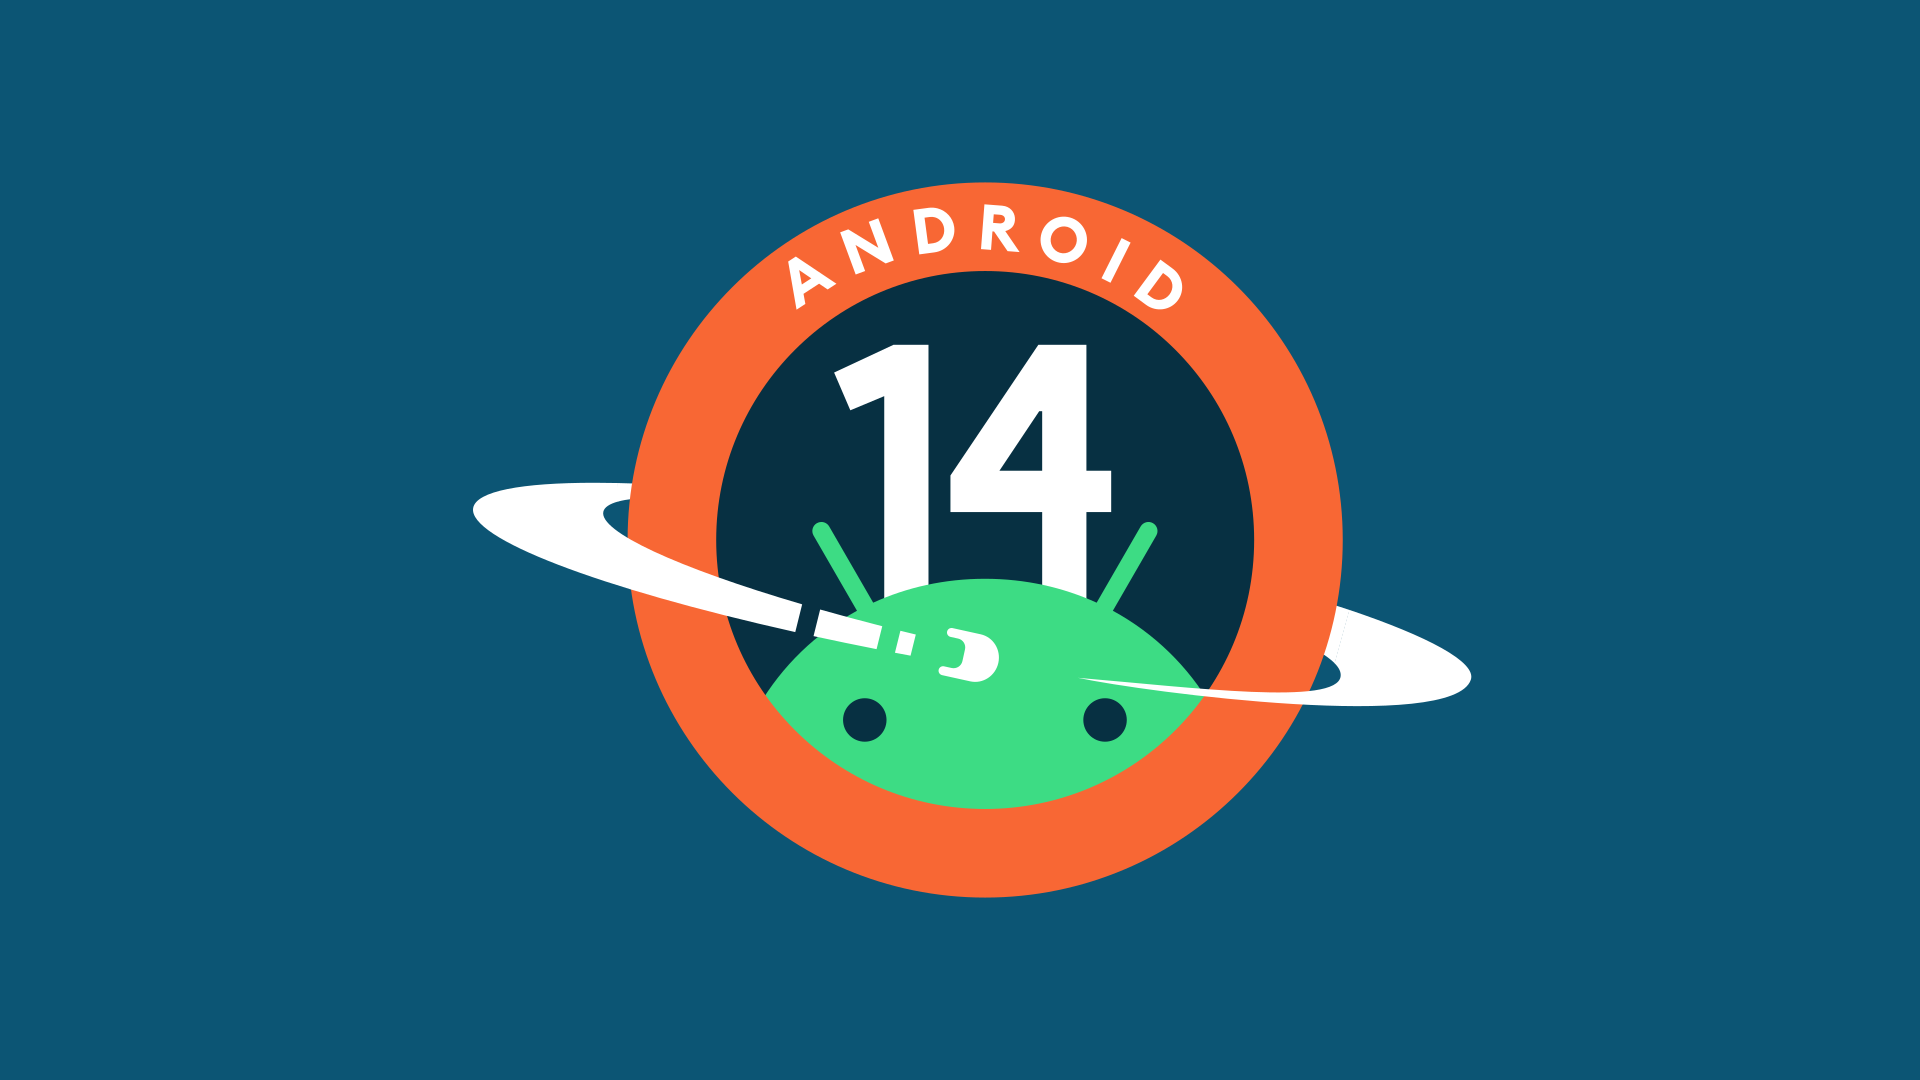 Android 14 logo.